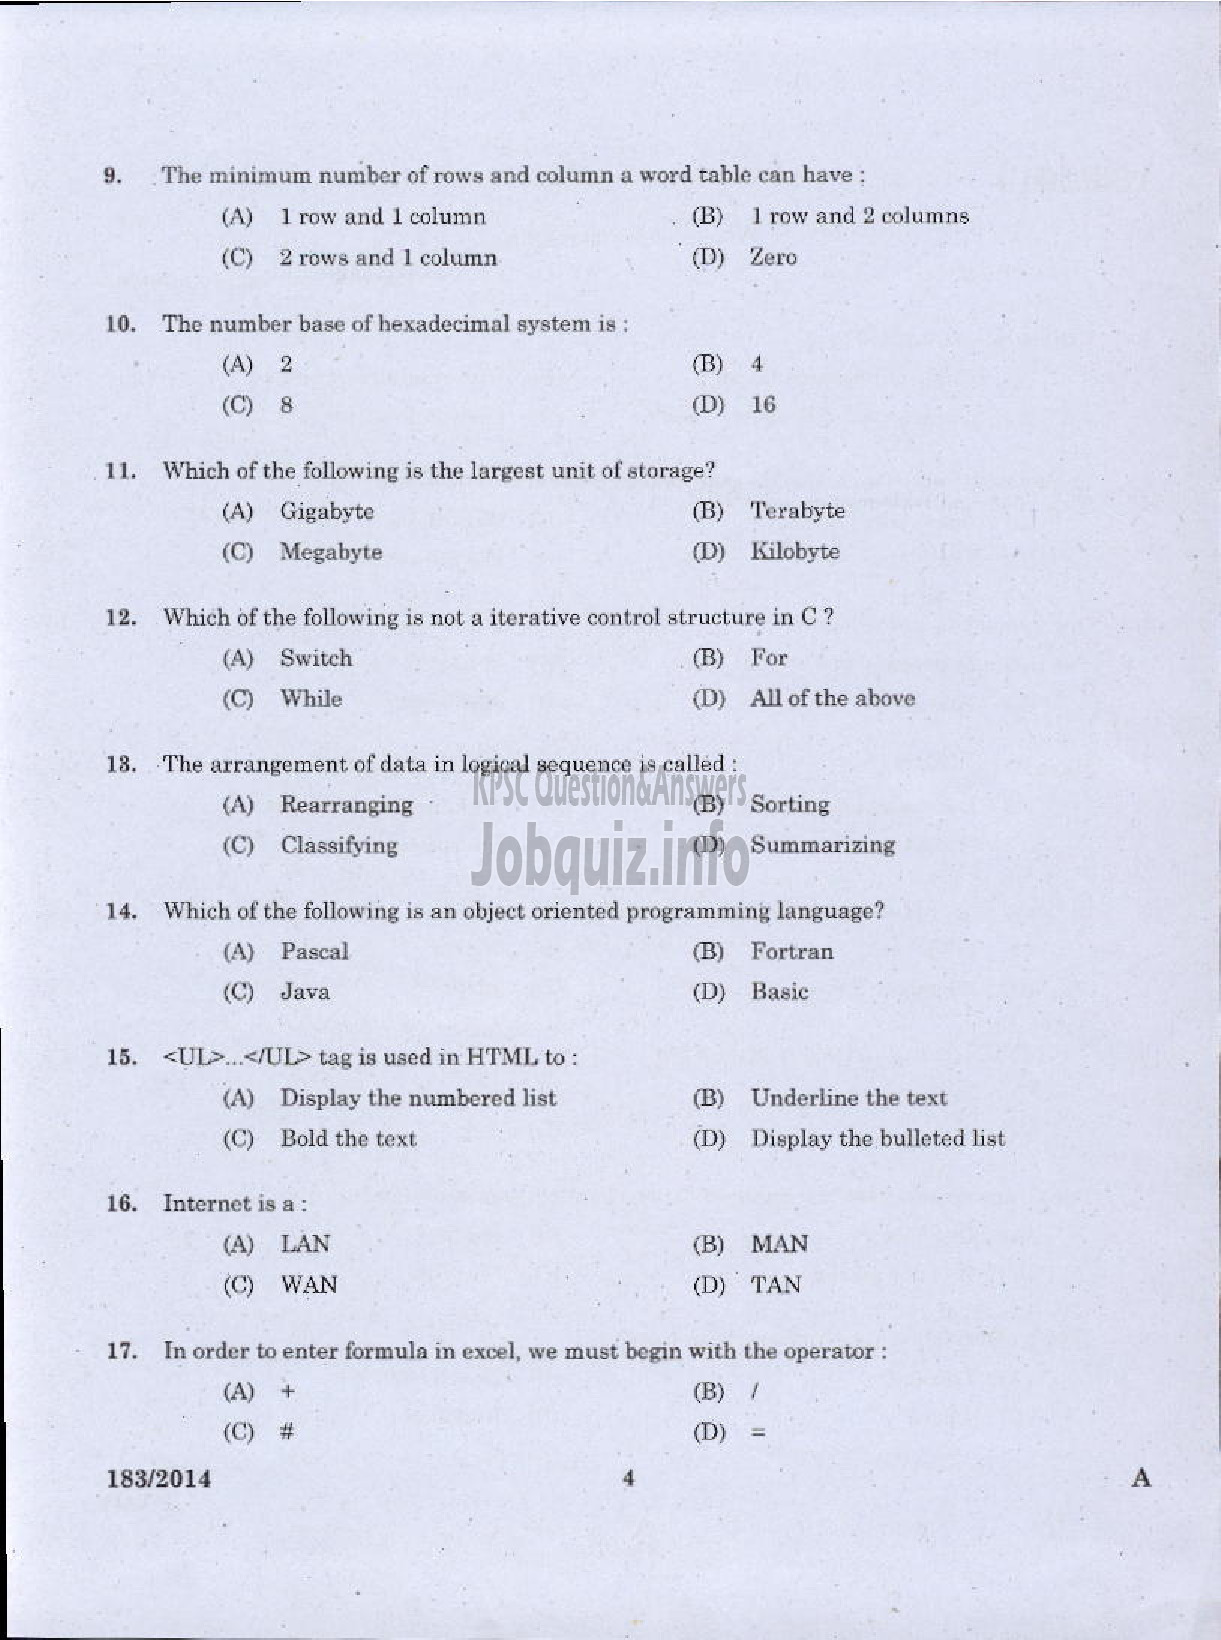 Kerala PSC Question Paper - TRADESMAN COMPUTER ENGINEERING TECHNICAL EDUCATION TVM KGD-2